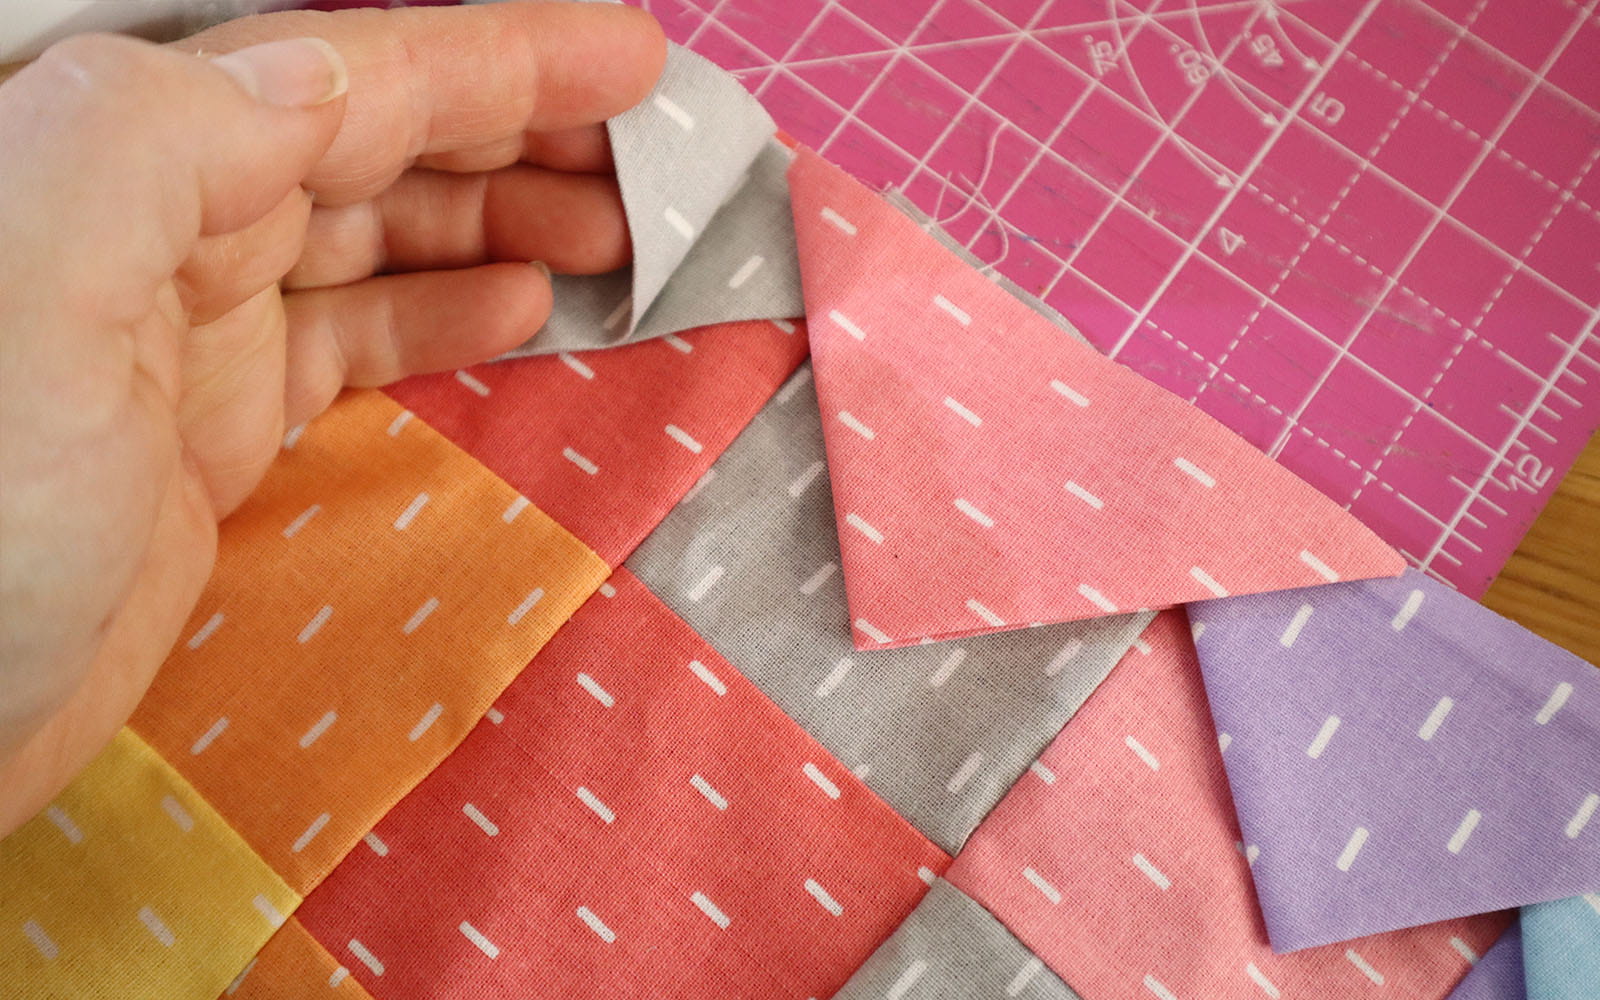 Hand lifting corner of grey fabric triangle to show placement